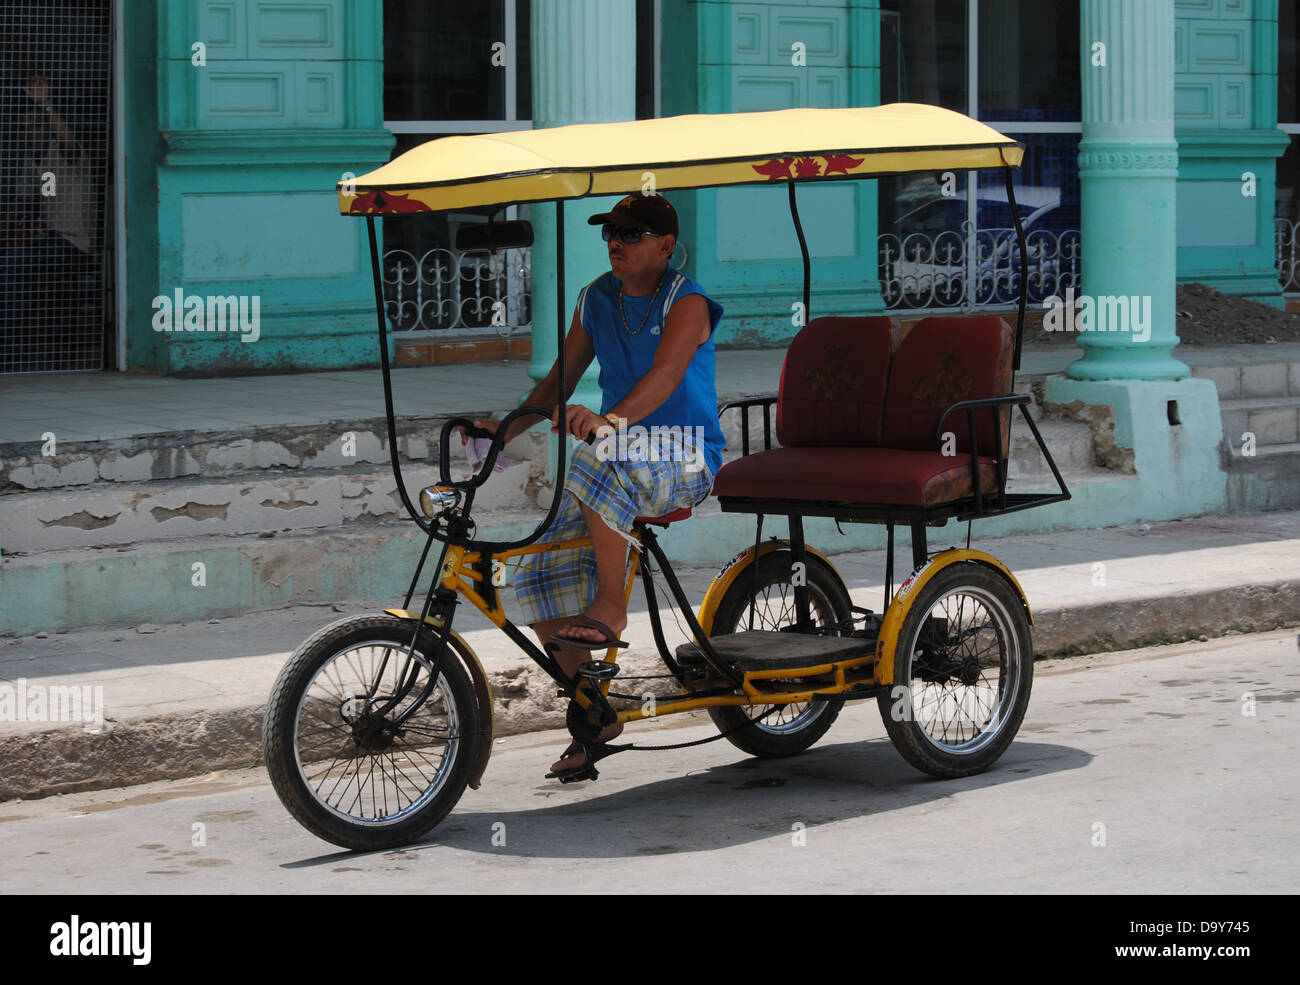 Bicycle Taxi High Resolution Stock Photography and Images - Alamy